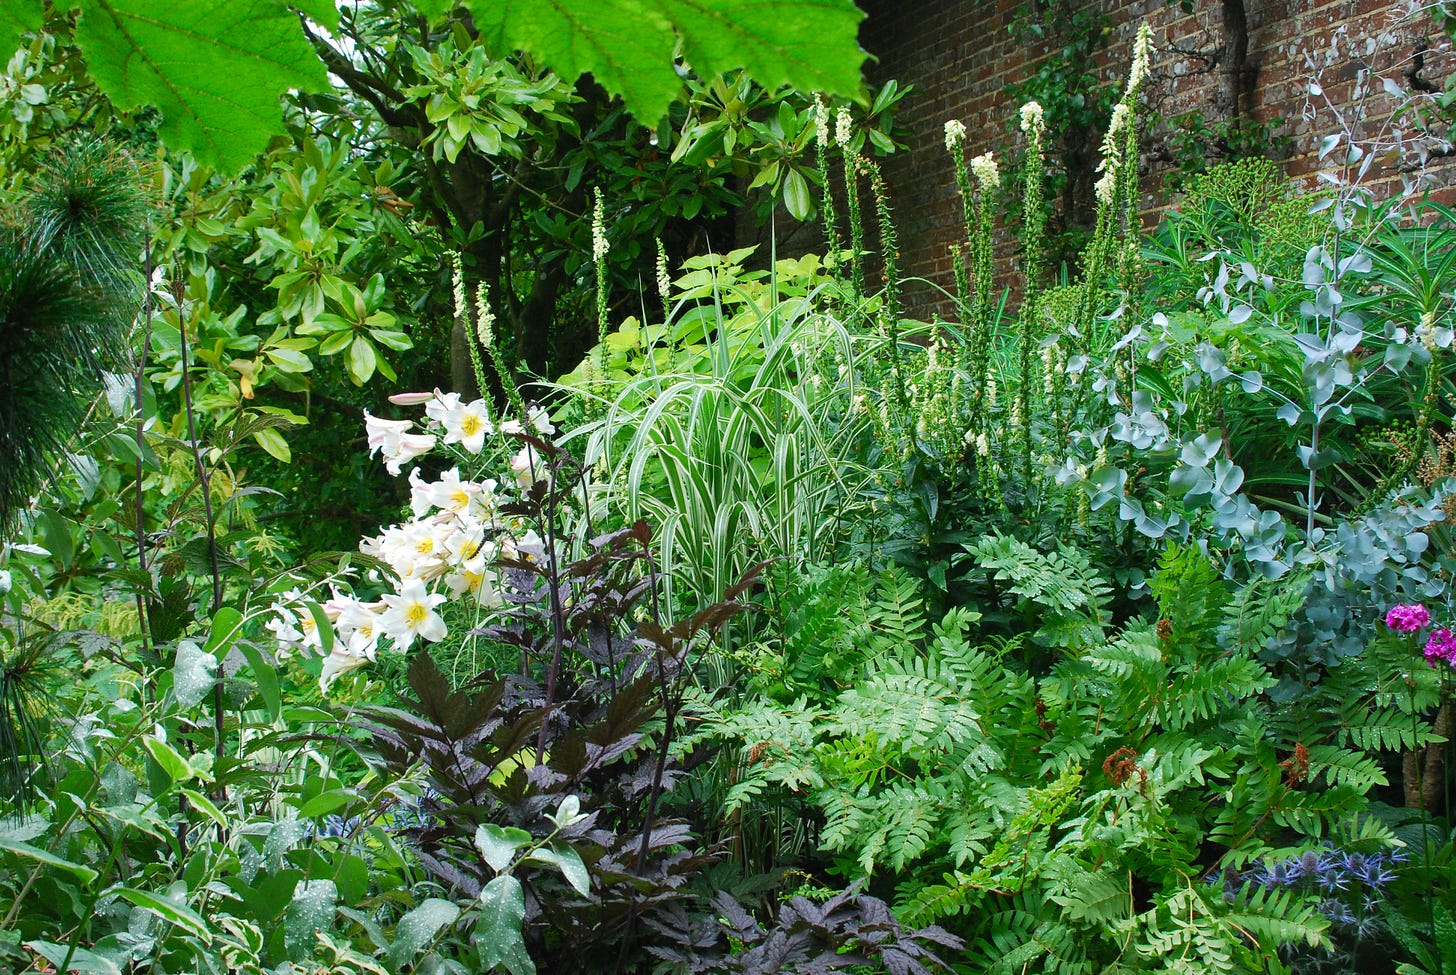 A vibrant shade combination of lilies, Actaea, ferns, grasses, foxgloves and Eucalyptus at Great Dixter.